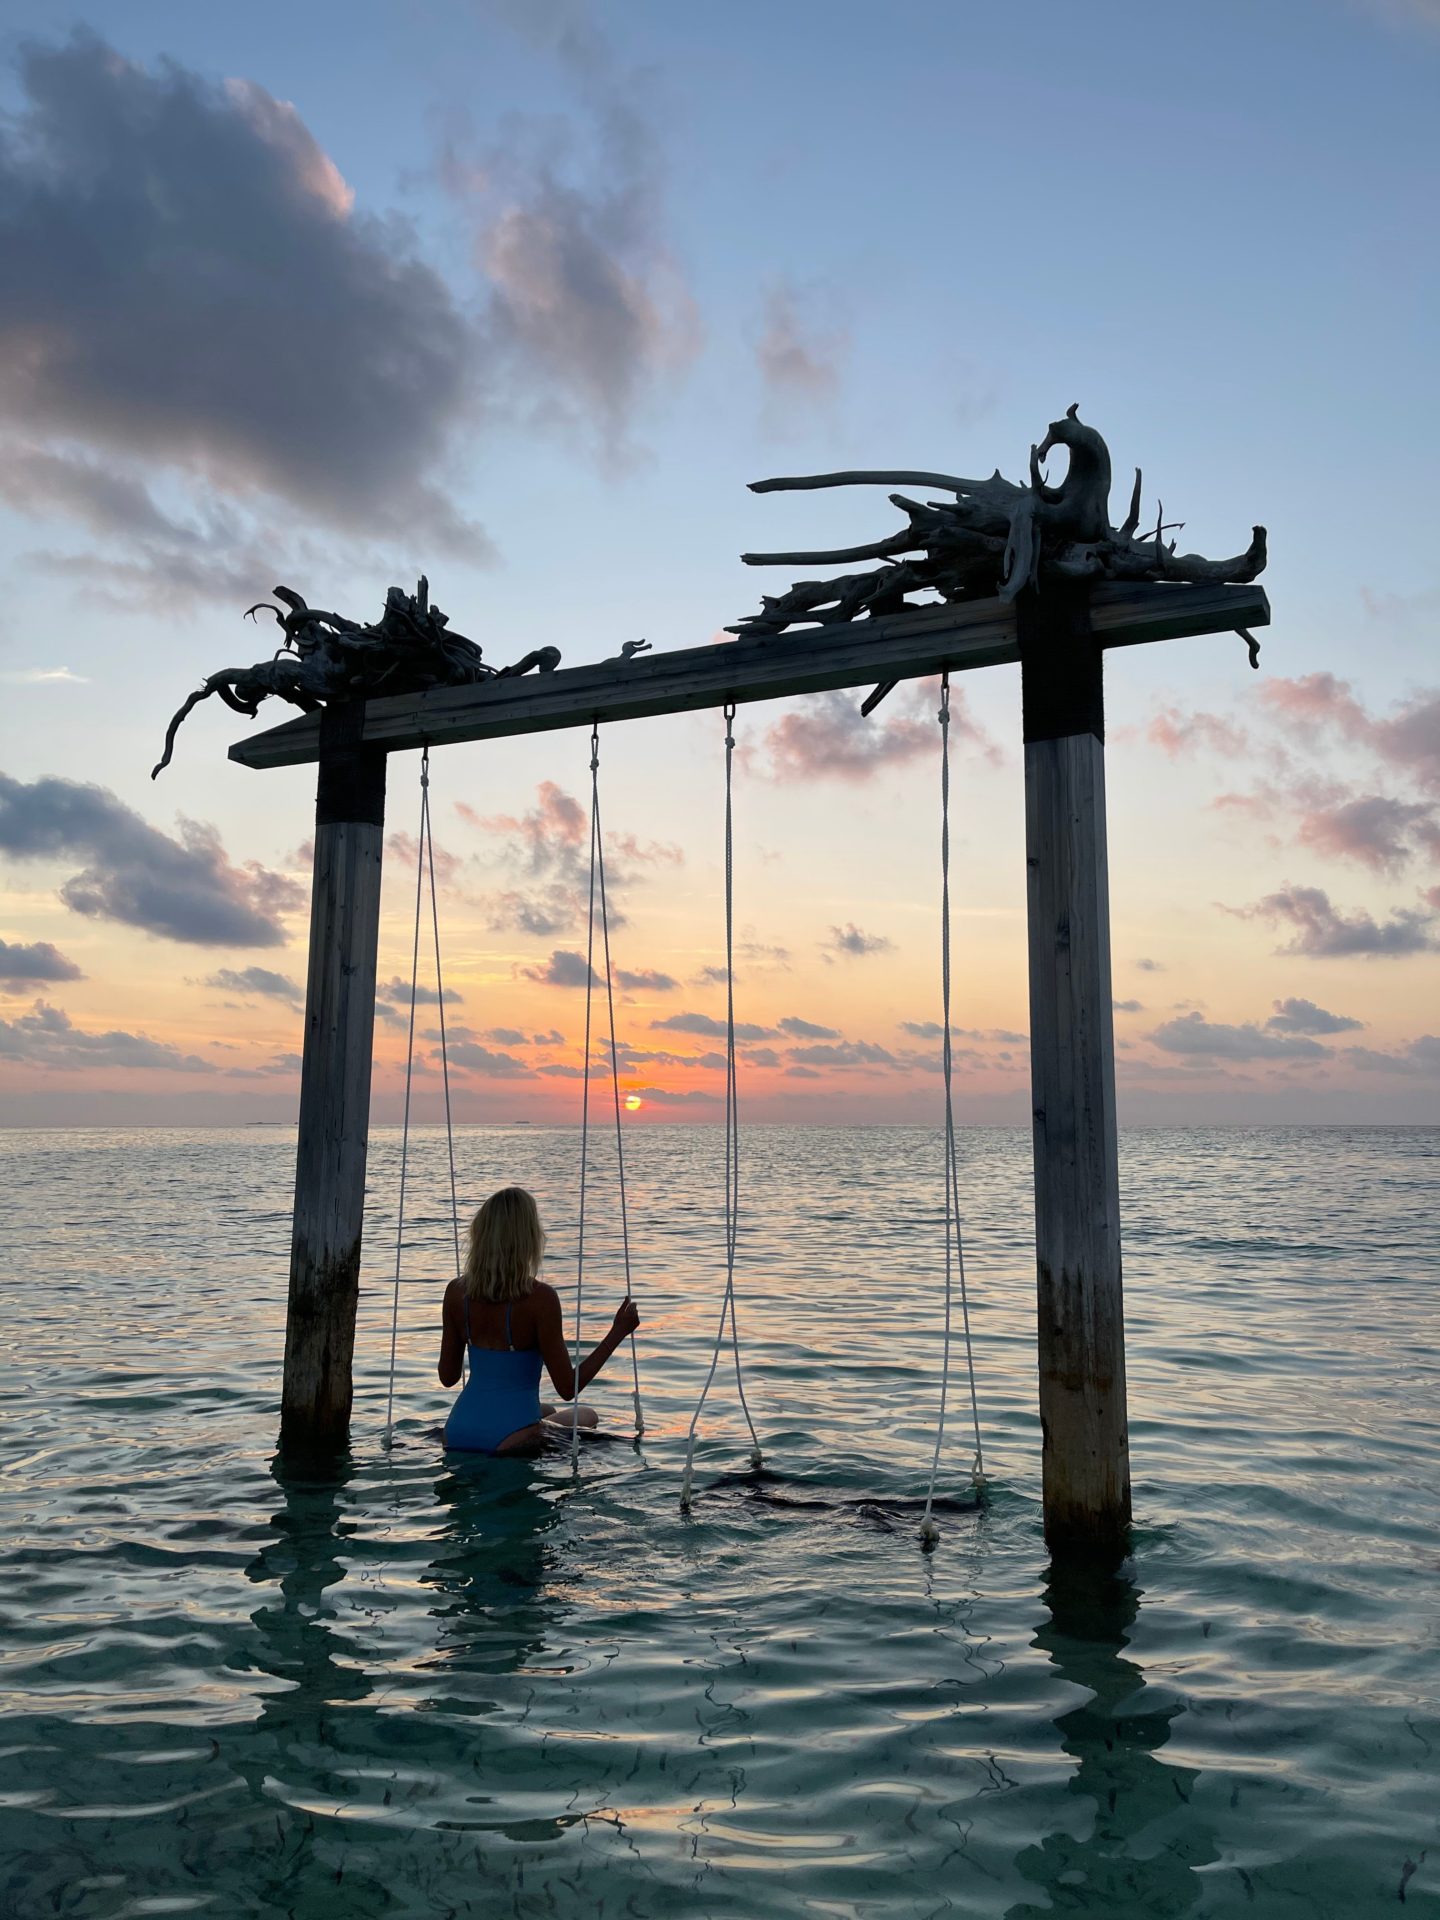 Zanna van Dijk sat on a swing in the middle of the sea in the Maldives looking out to the horizon at dusk